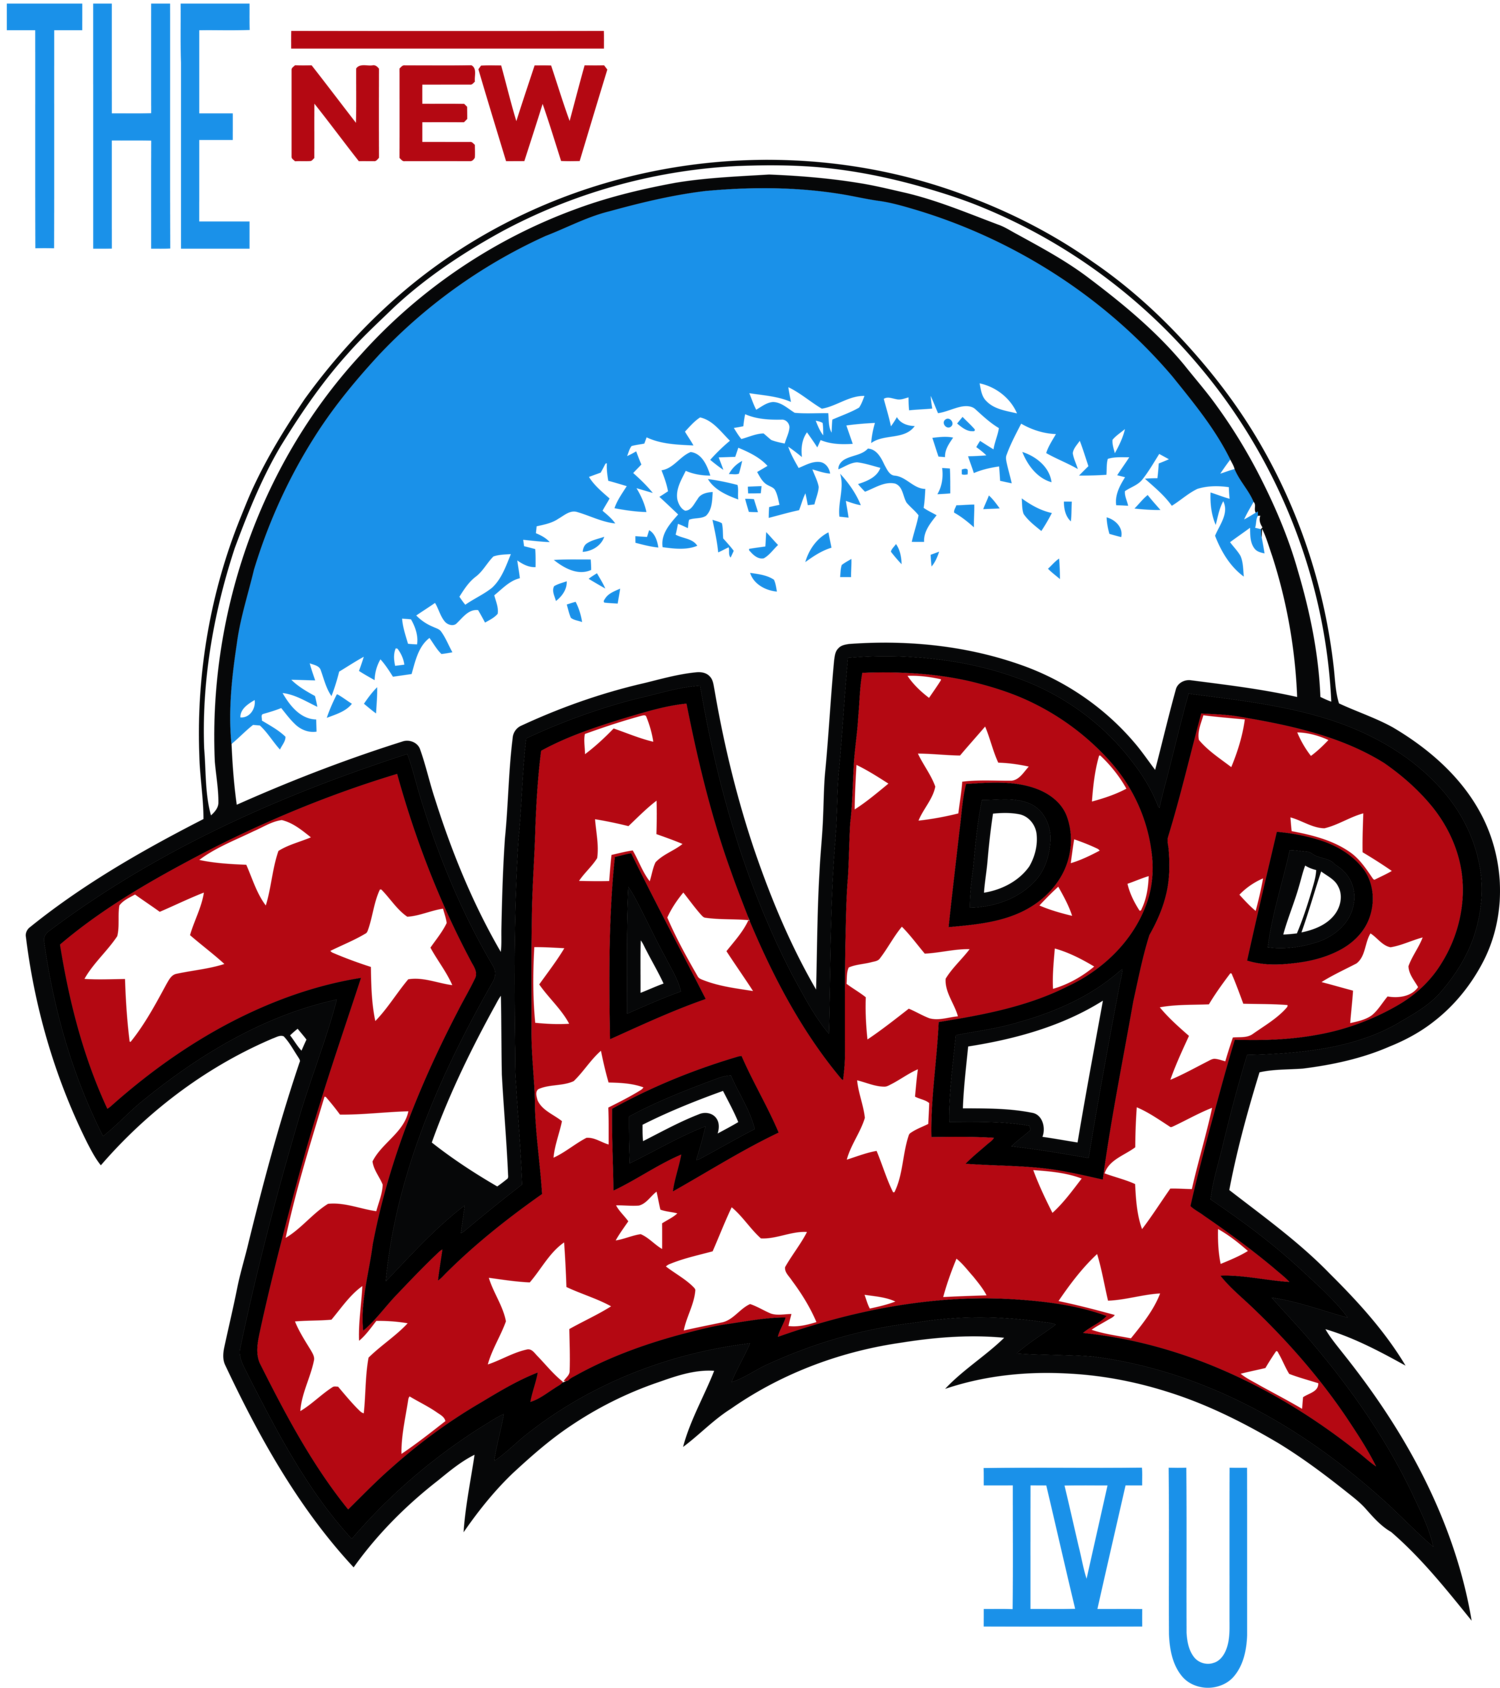 The Zapp Band